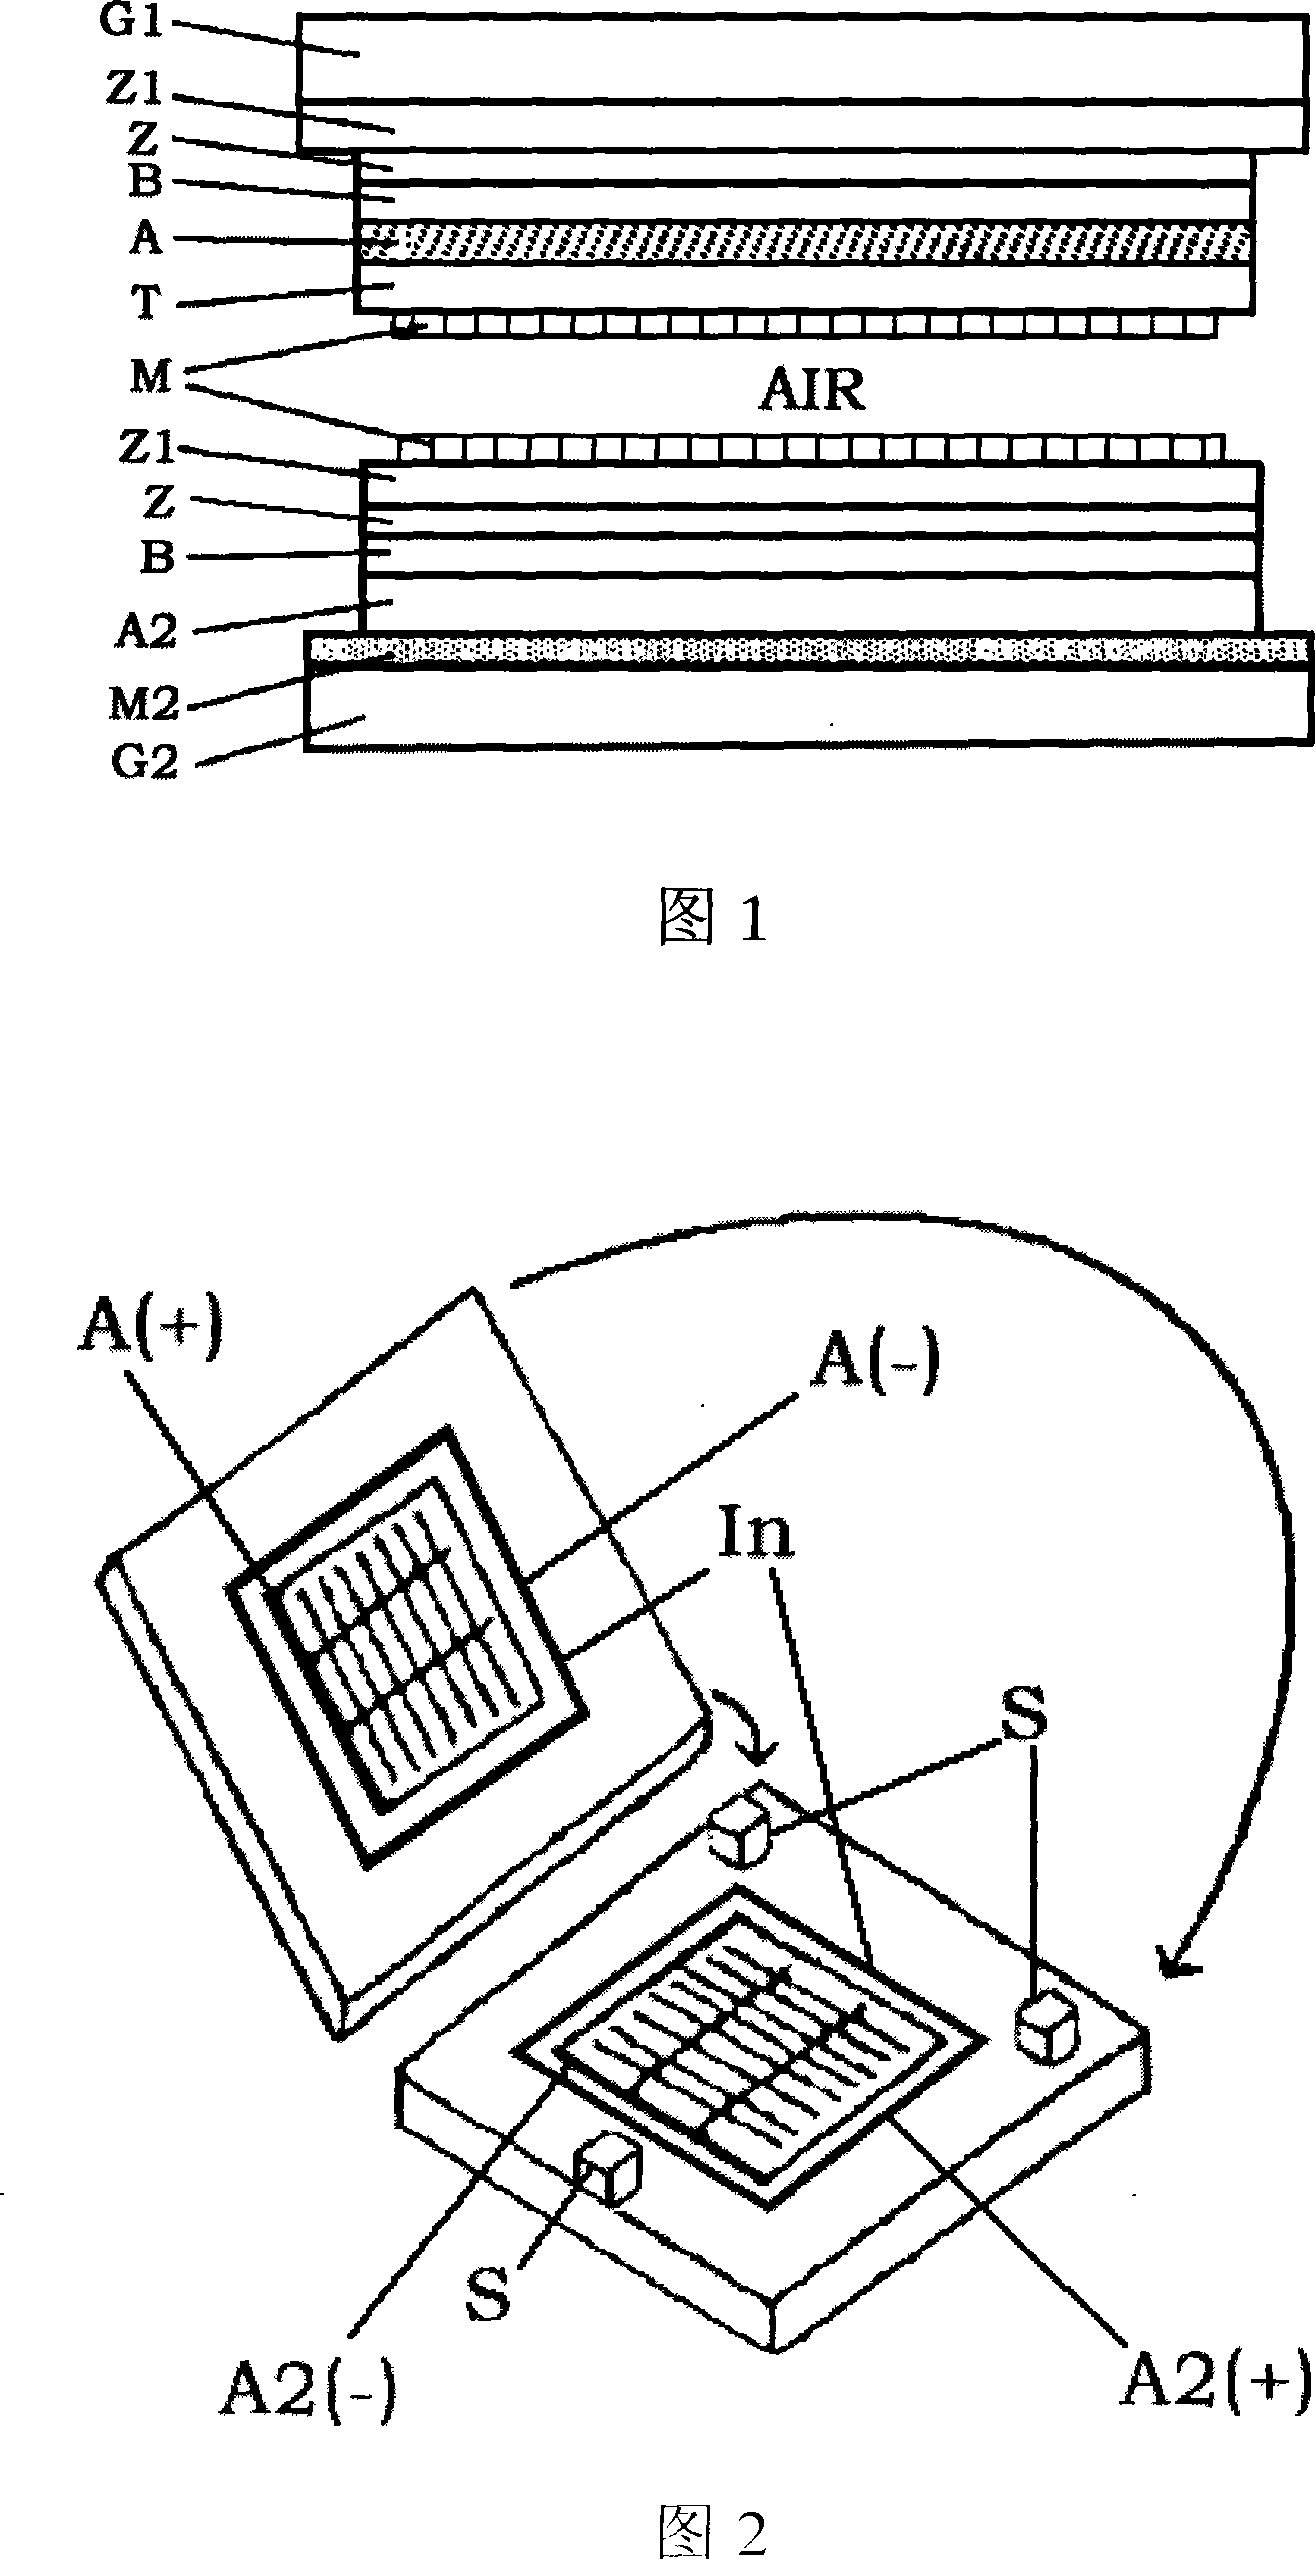 AlSb/CIS thin film solar cell of mechanical laminated layer